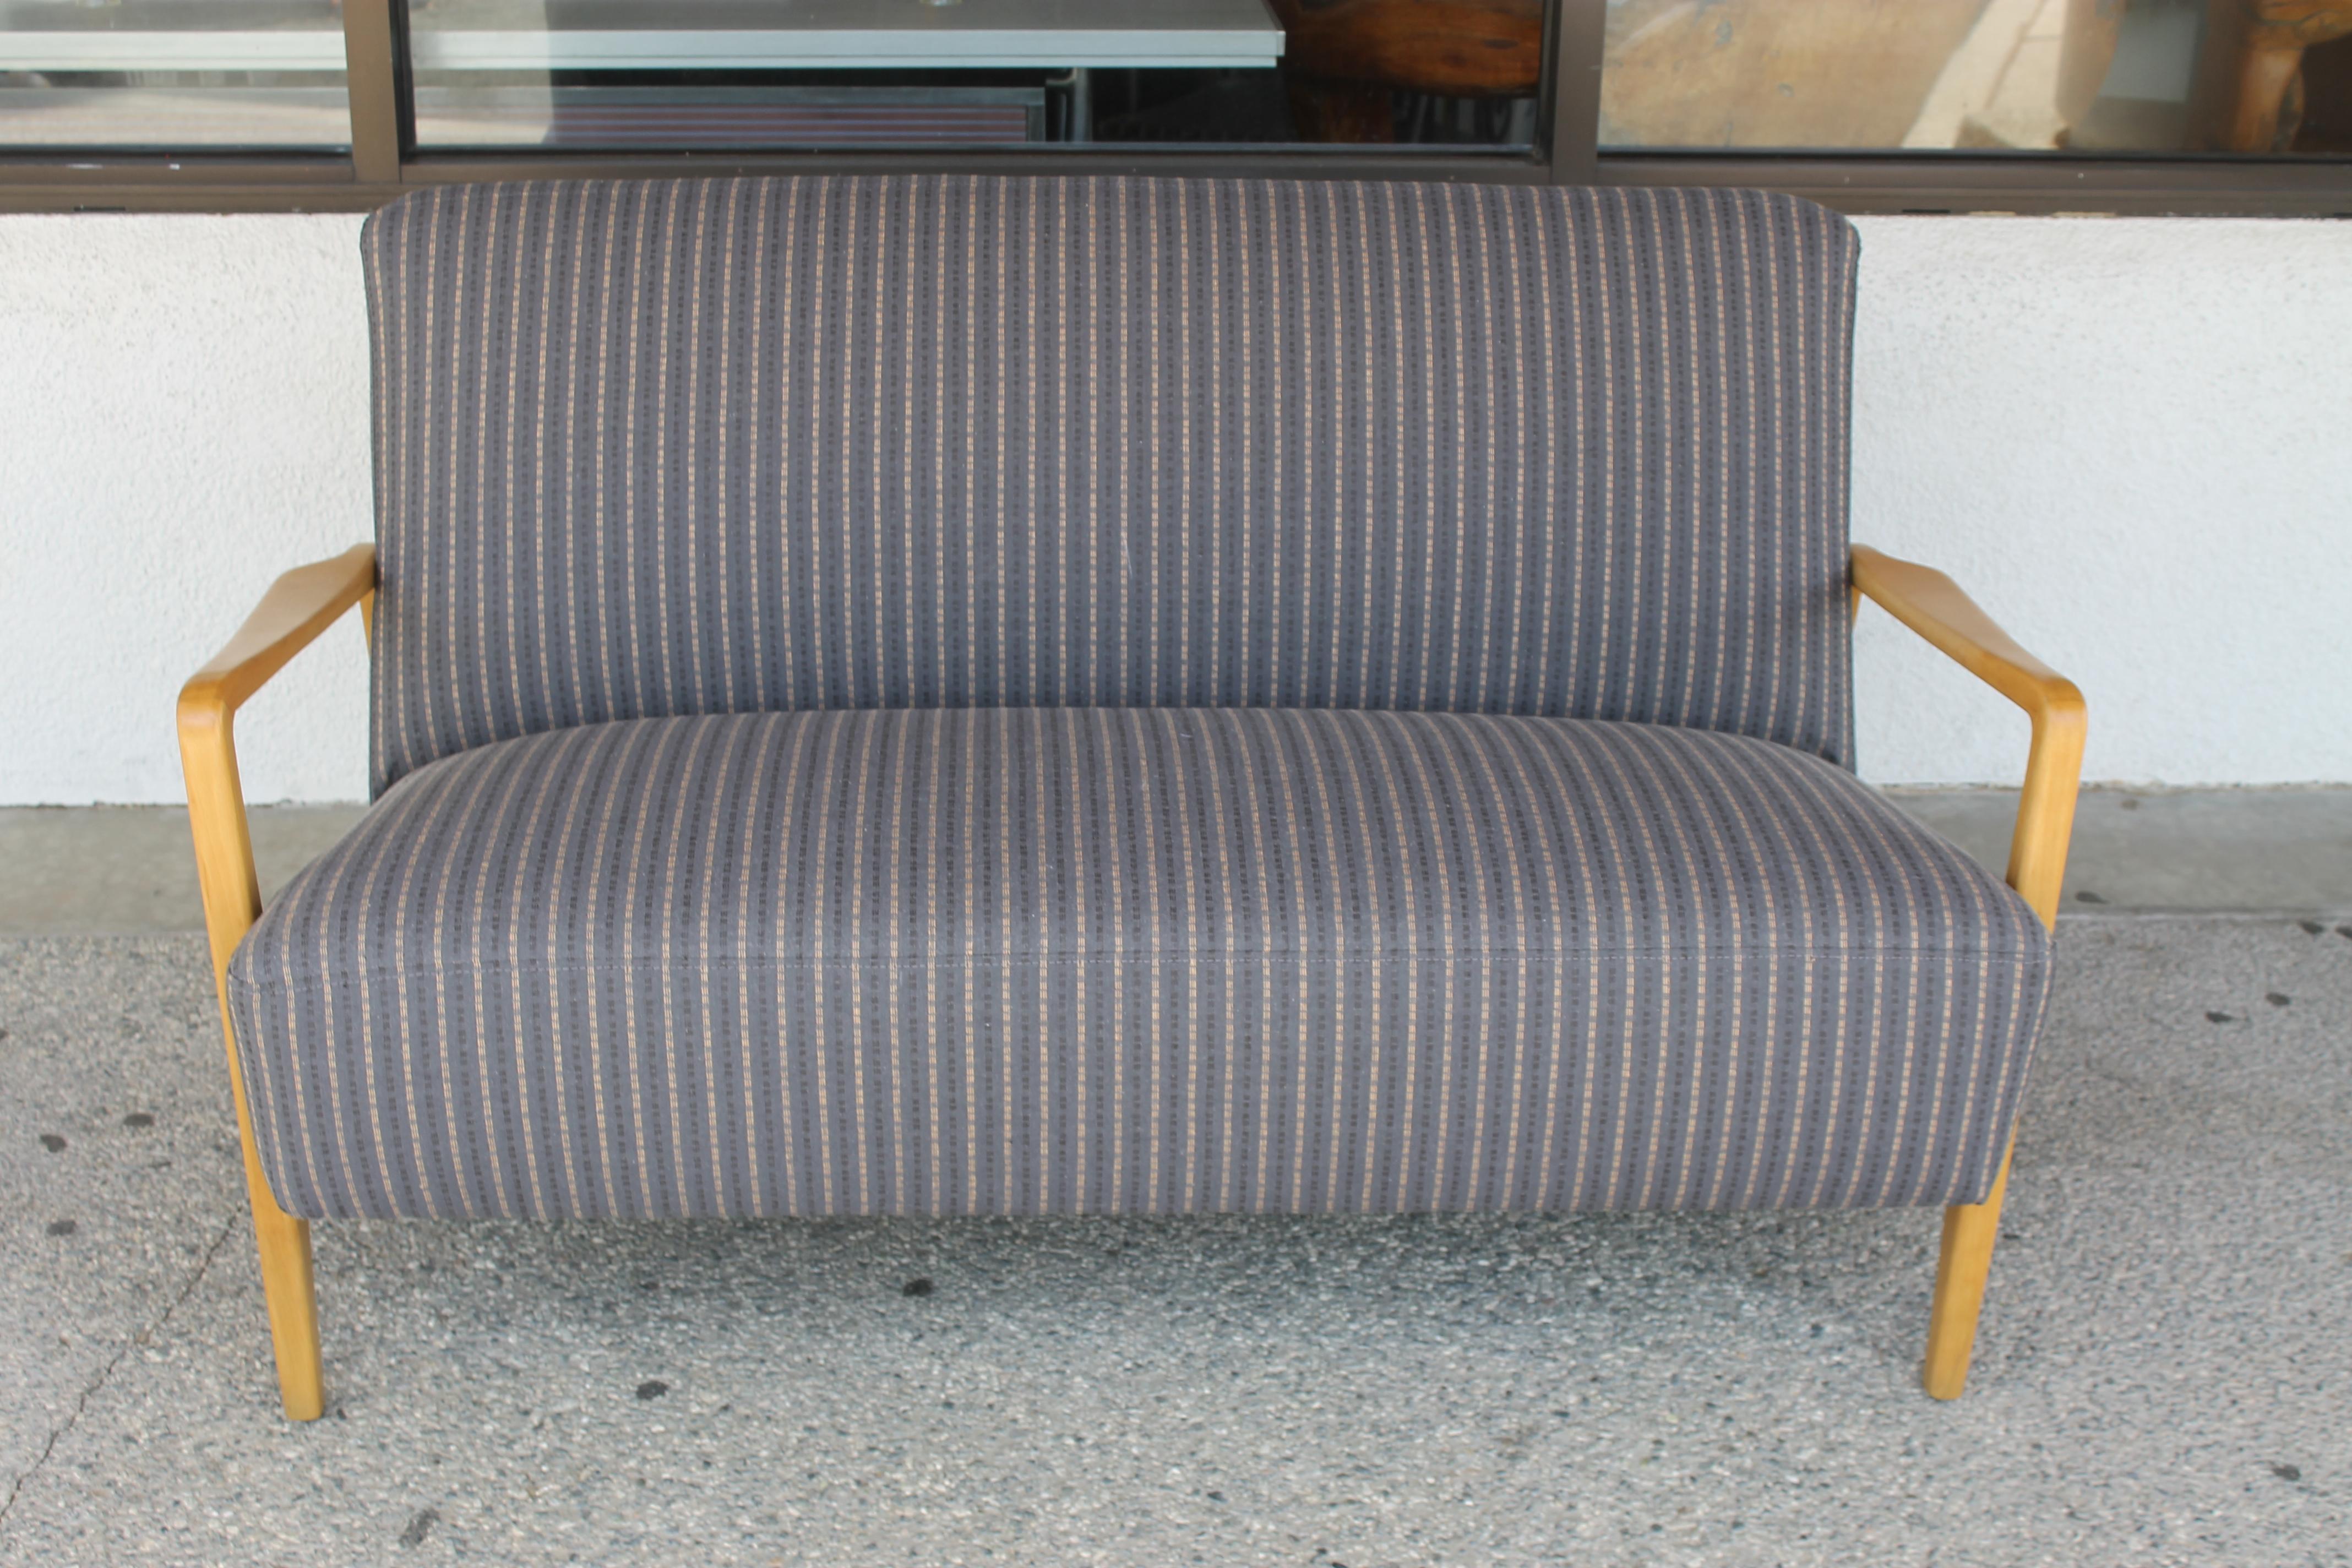 Settee in the style of Folke Ohlsson for DUX. Settee has been professionally refinished and upholstered. It measures: 53